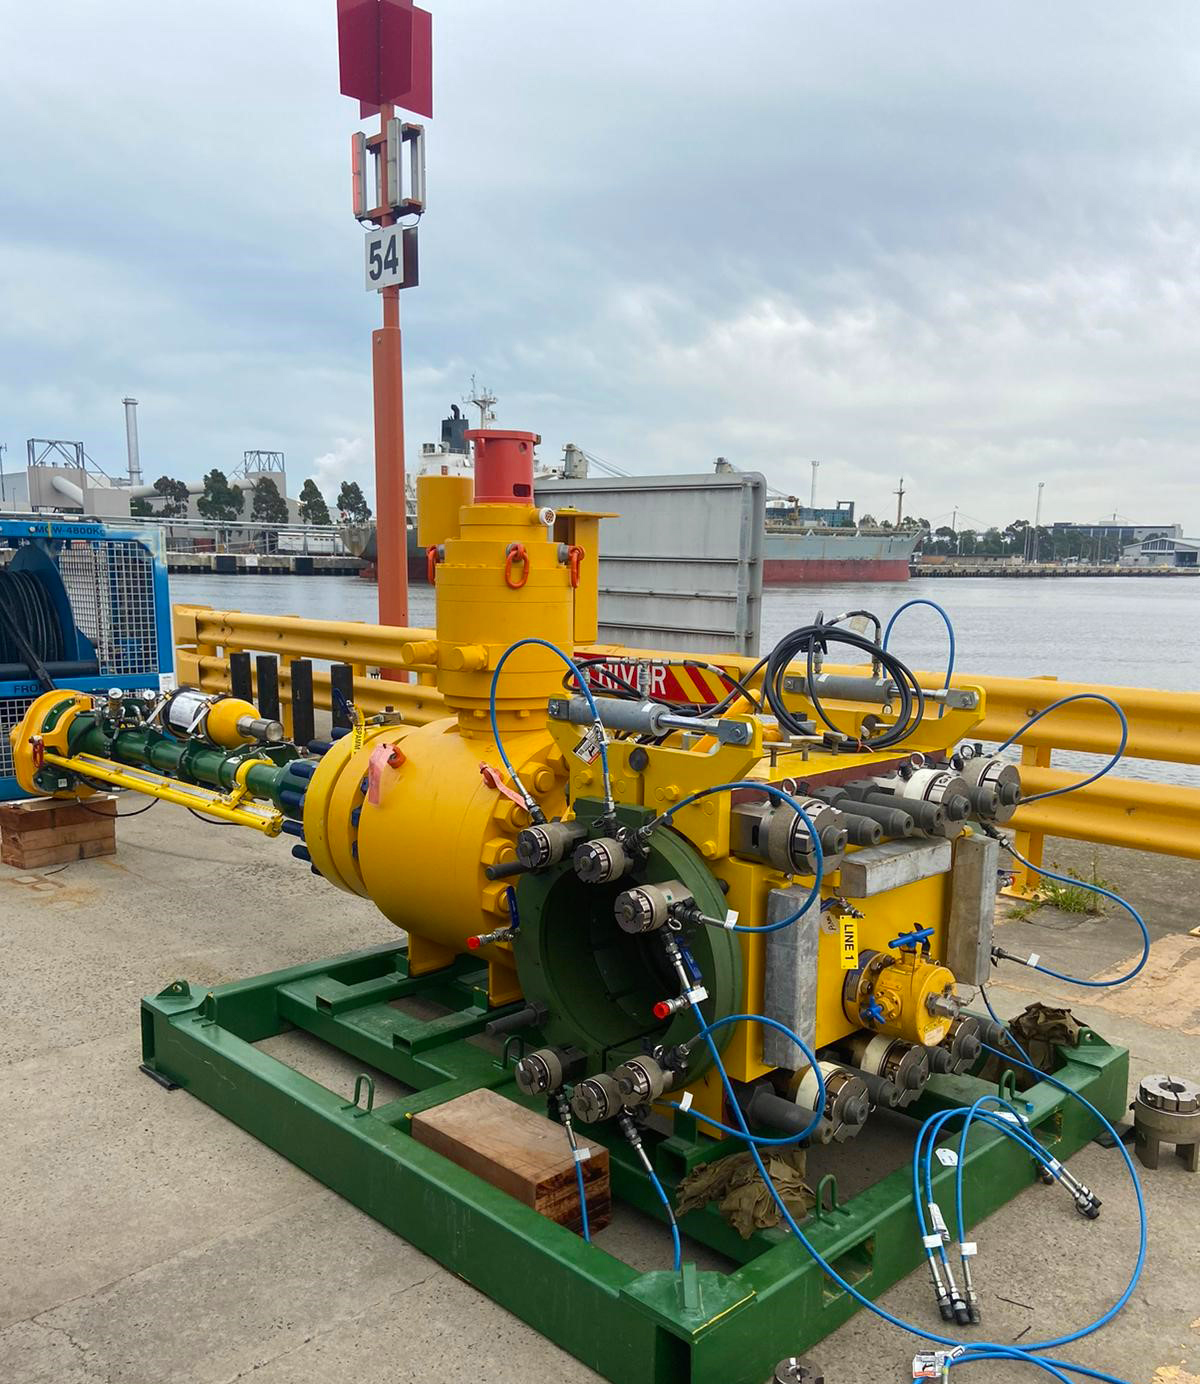 Subsea Clamp Hot Tap Machine used on STATS Group Australian subsea project